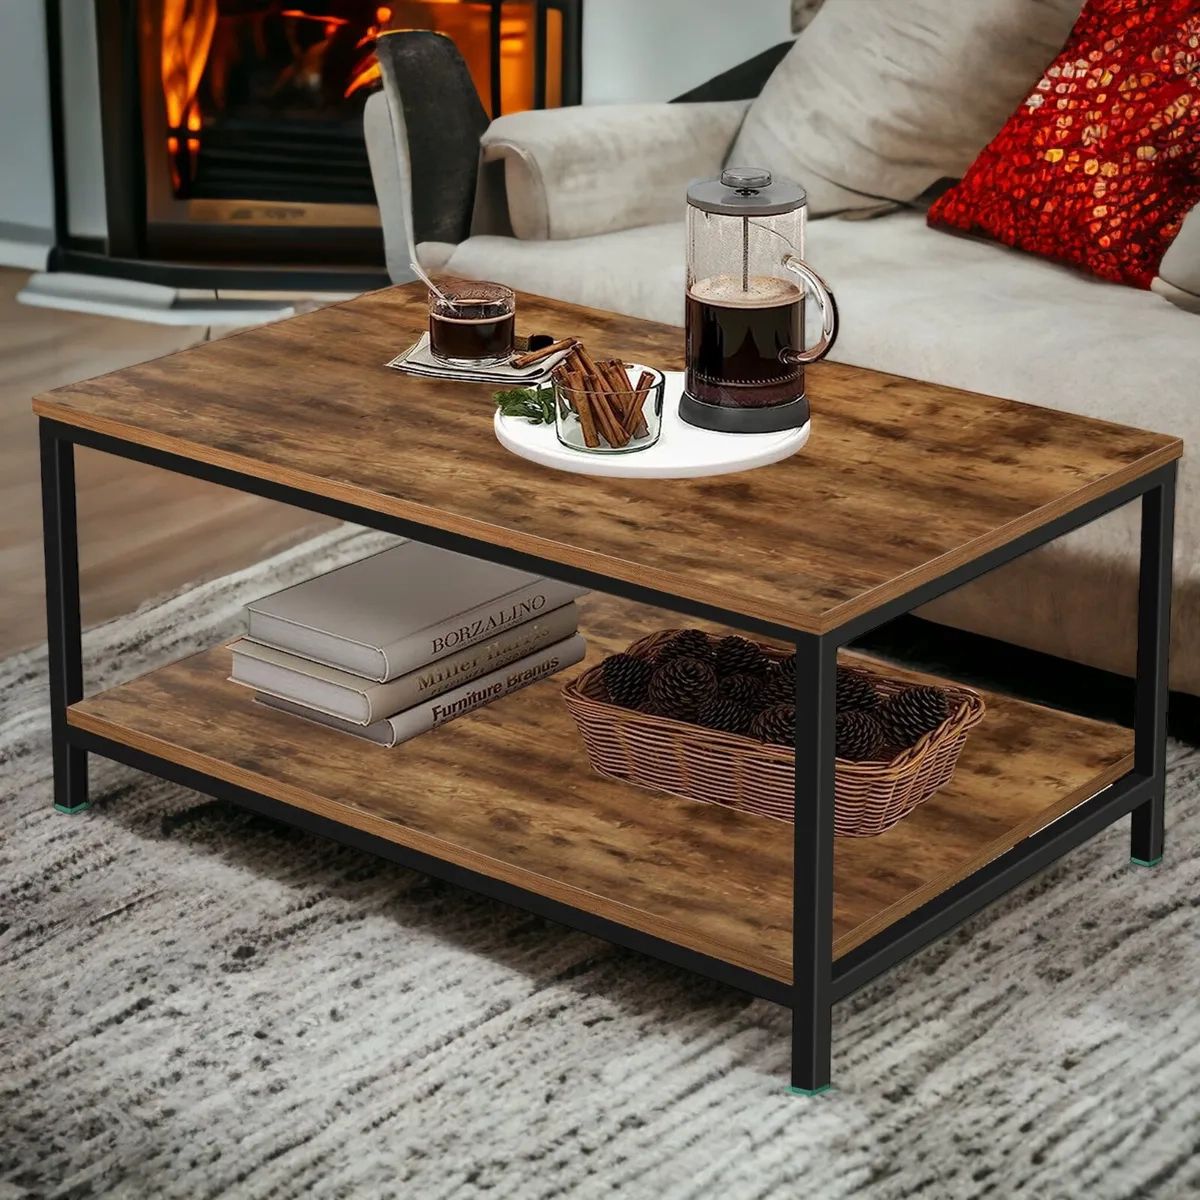 Coffee Table With Storage Side Table Metal Legs Wooden Living Room Furniture  | Ebay With Regard To Coffee Tables With Metal Legs (View 7 of 15)